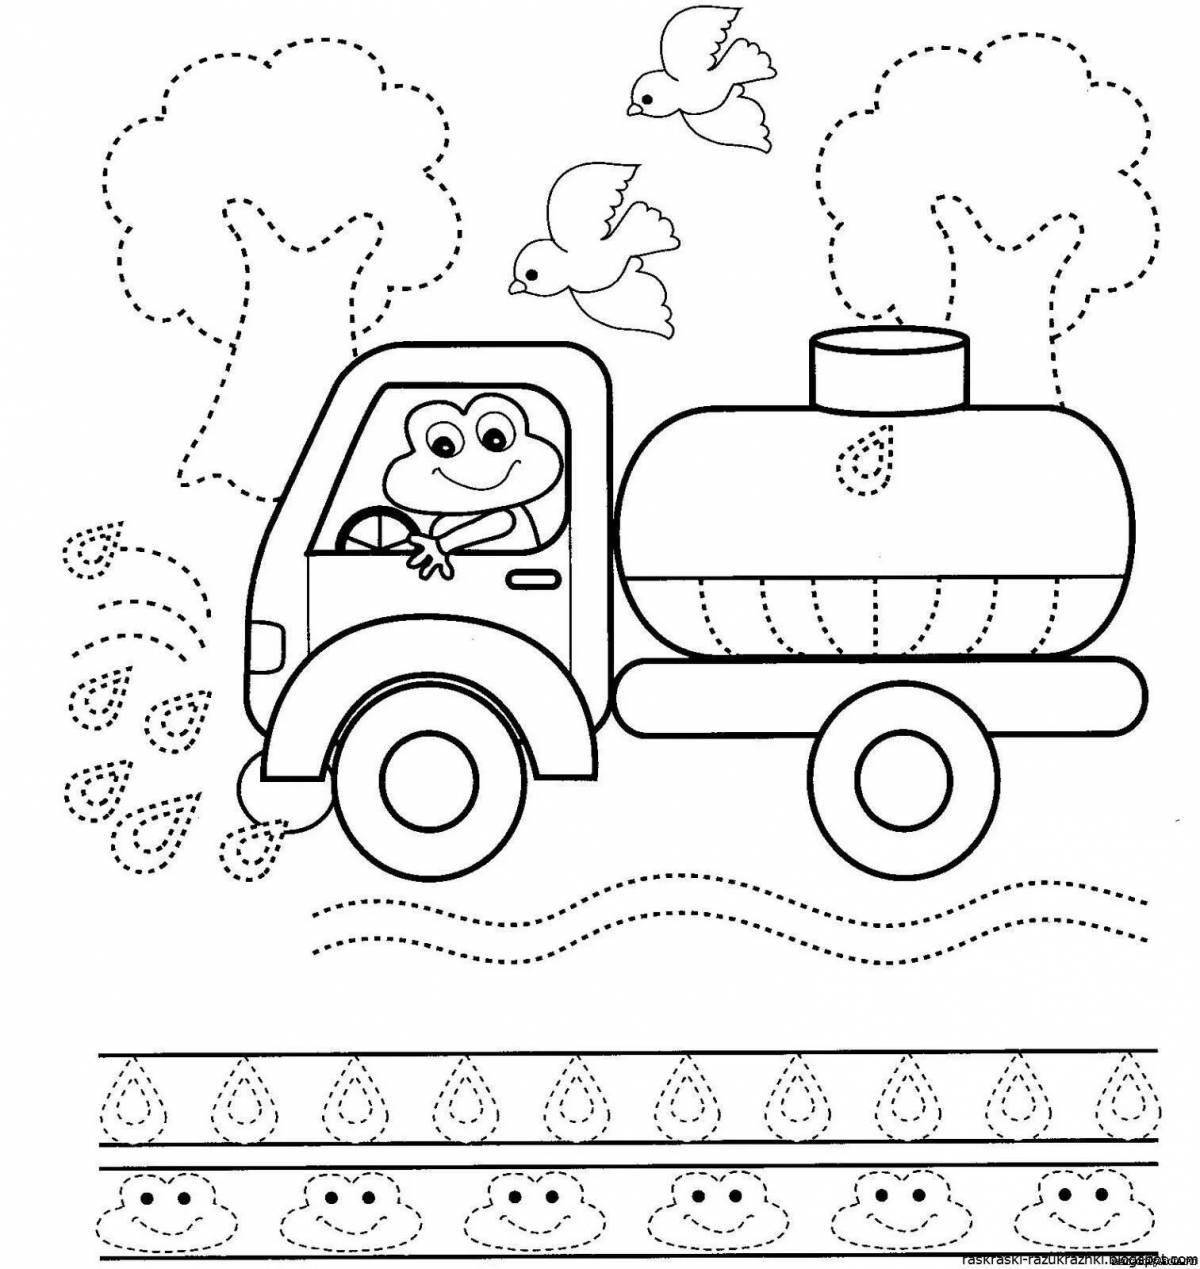 A fascinating educational coloring book for children aged 5